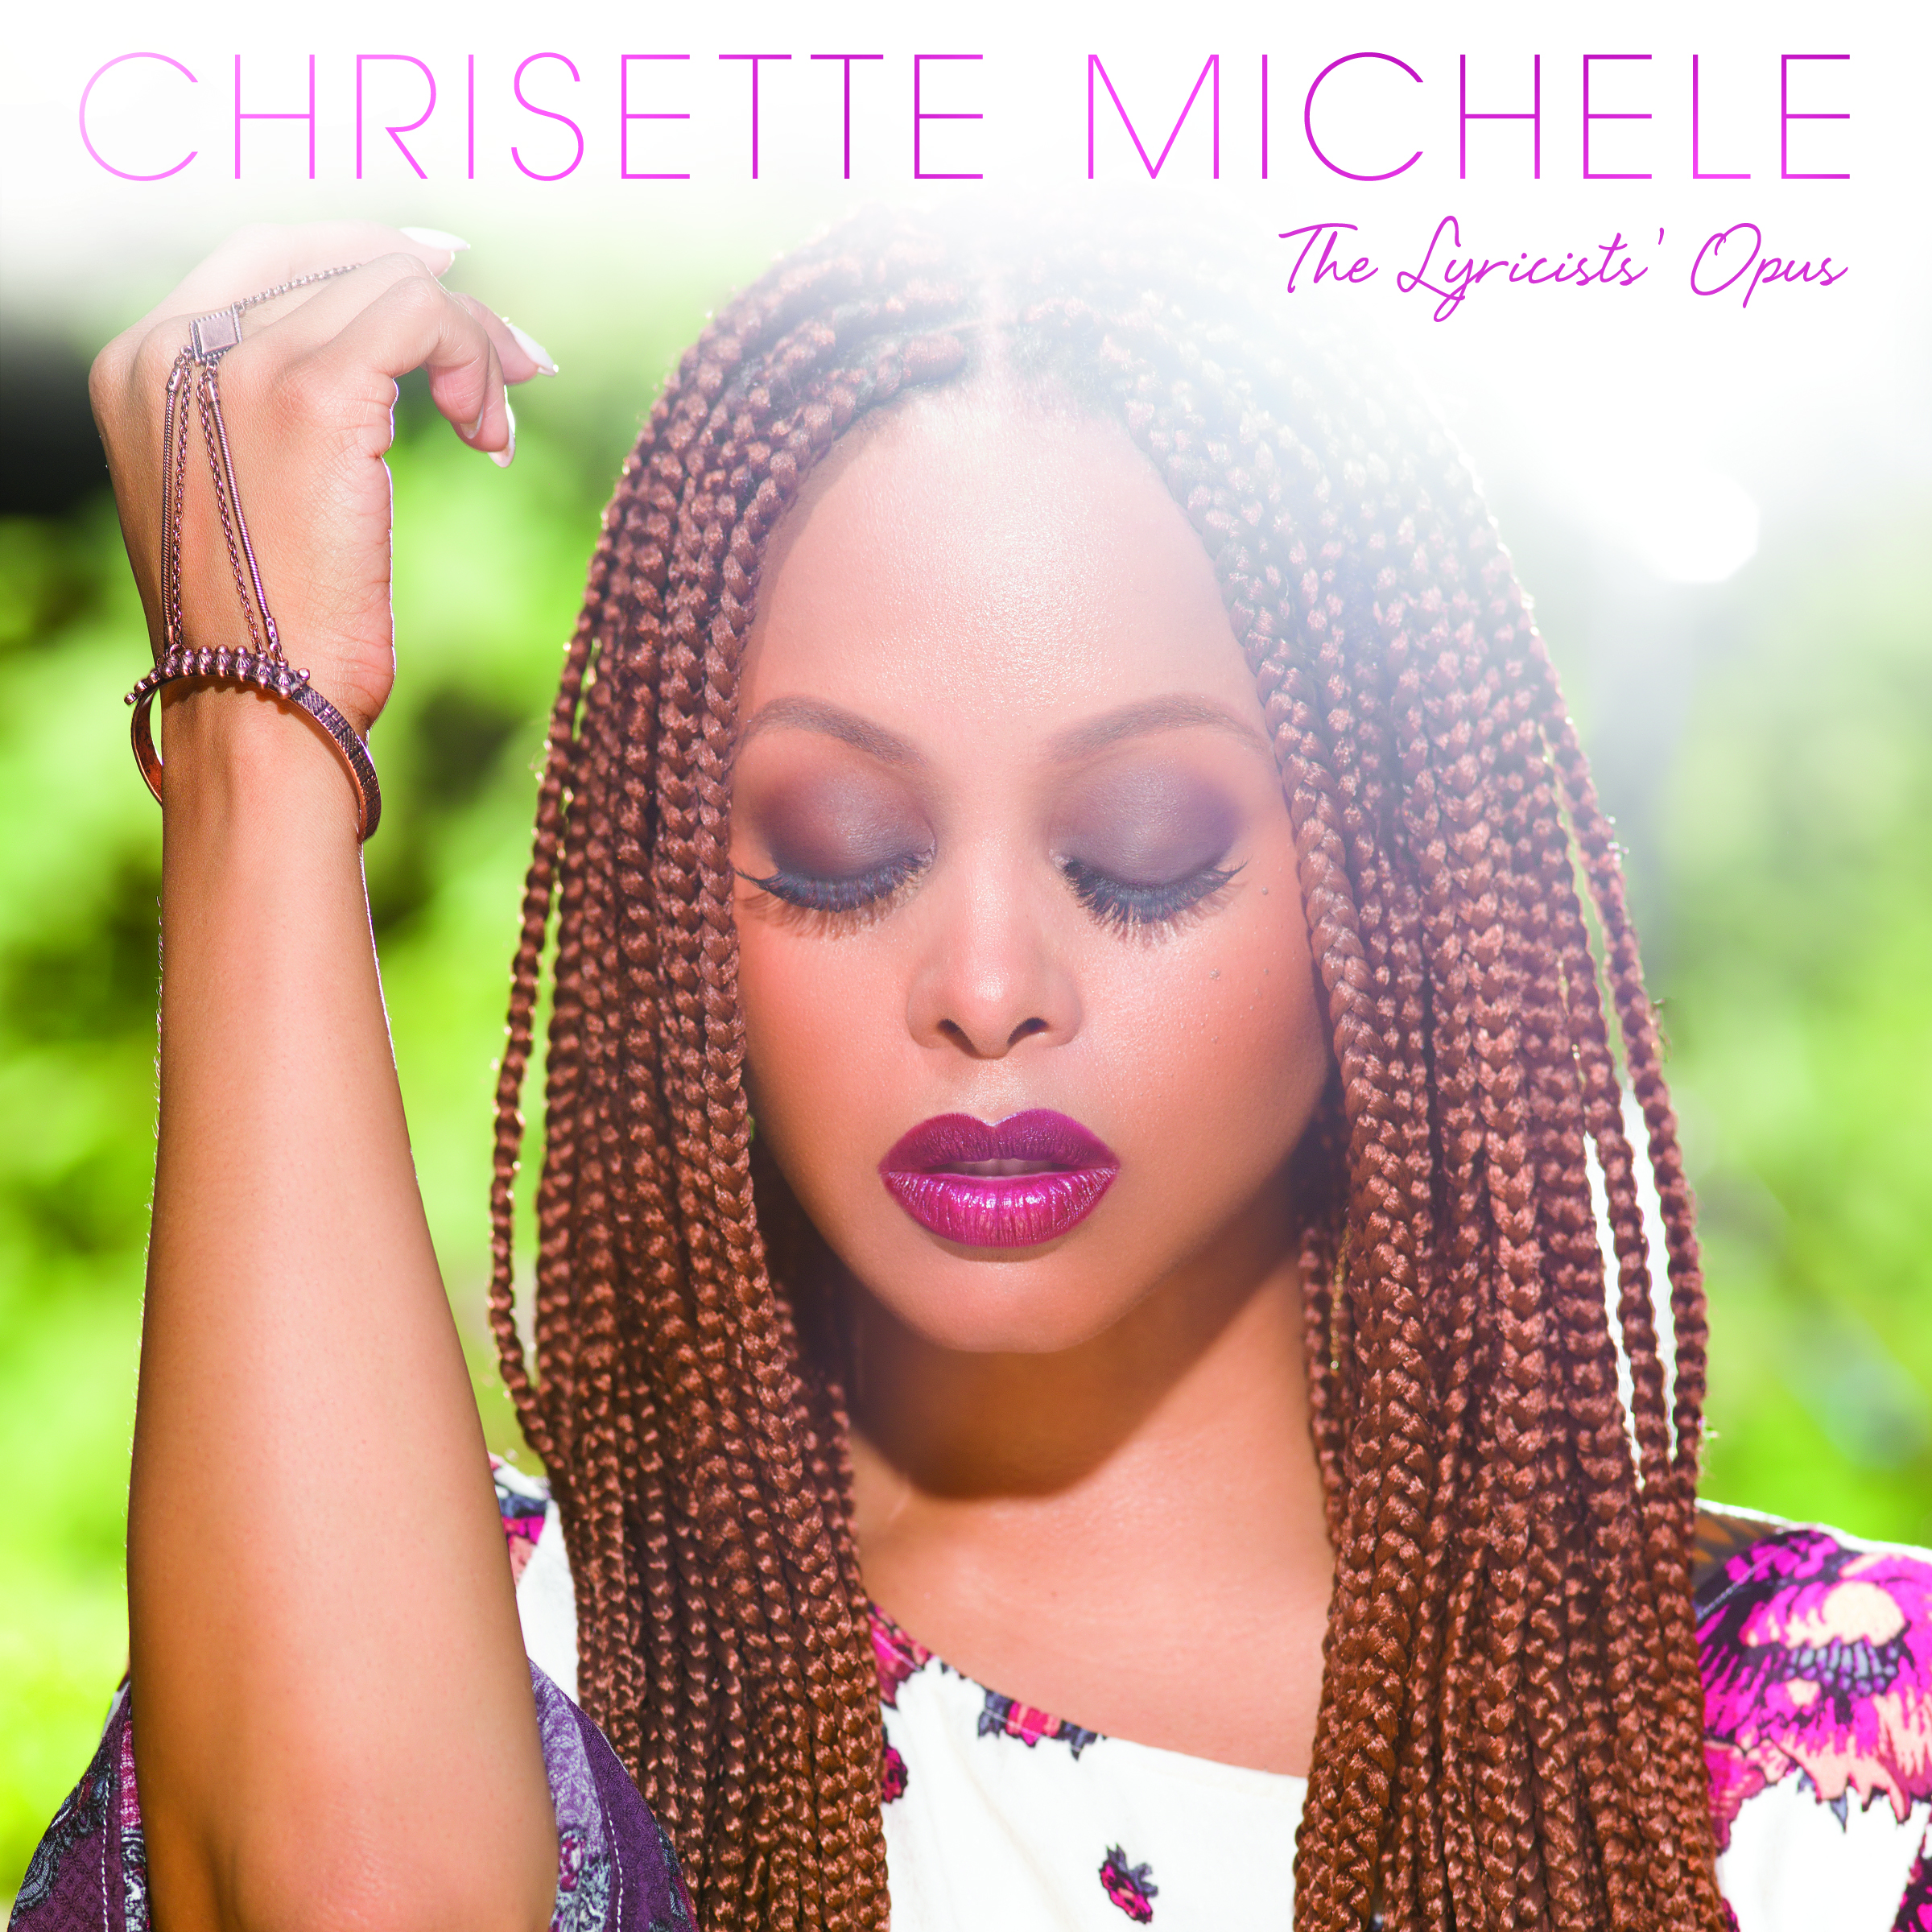 New Music: Chrisette Michele "Together" (Video Teaser)